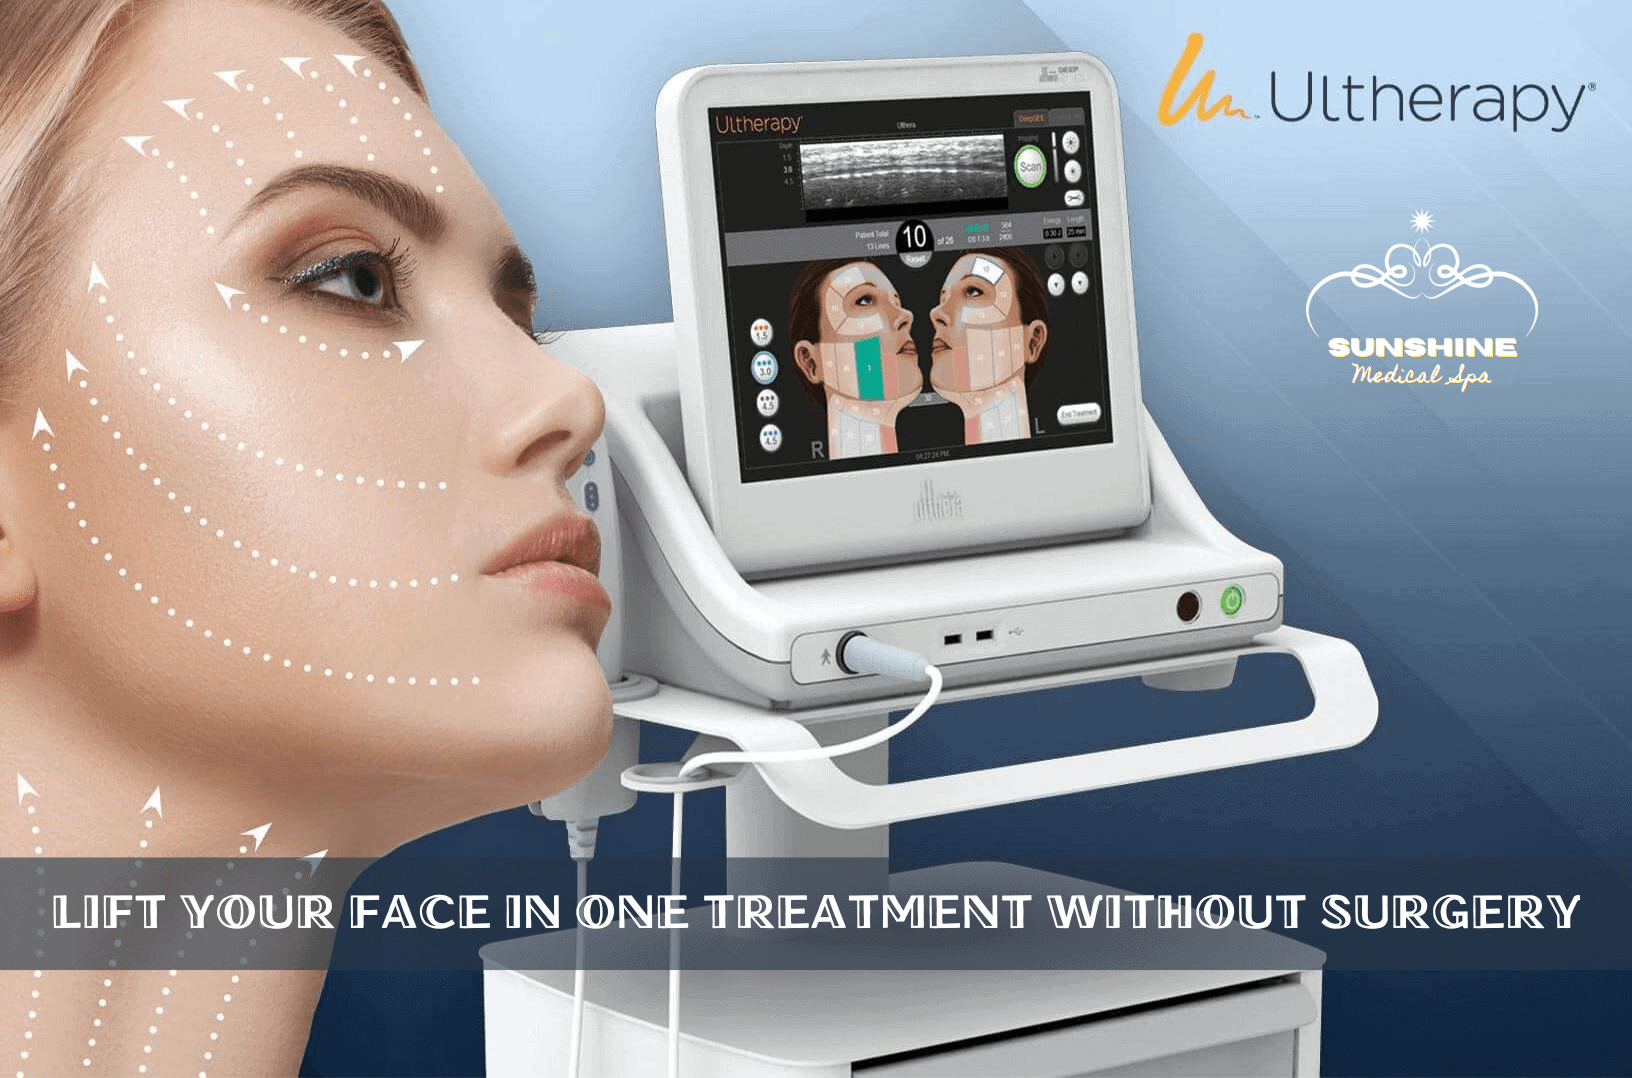 We provide 10+ skin tightening and face lift treatments in Waterloo Kitchener area. Ultherapy is our top choice, which can lift your face in only one treatment with results last for years.